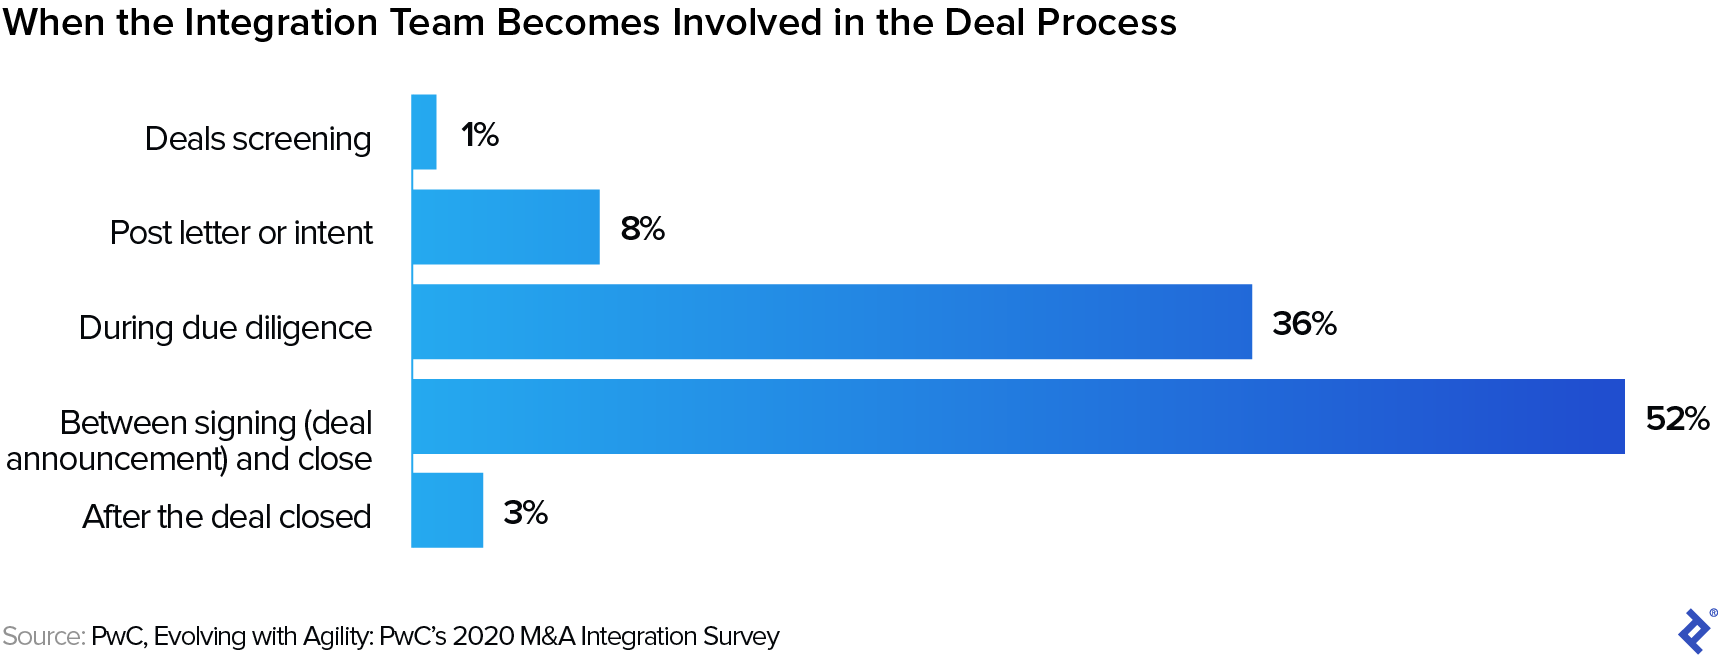 Bar chart titled, "When the Integration Team Becomes Involved in the Deal Process." Values listed are: Deals Screening, 1%; Post letter of intent, 8%; During due diligence, 36%; Between signing (deal announcement) and close, 52%; After the deal closed, 3%.